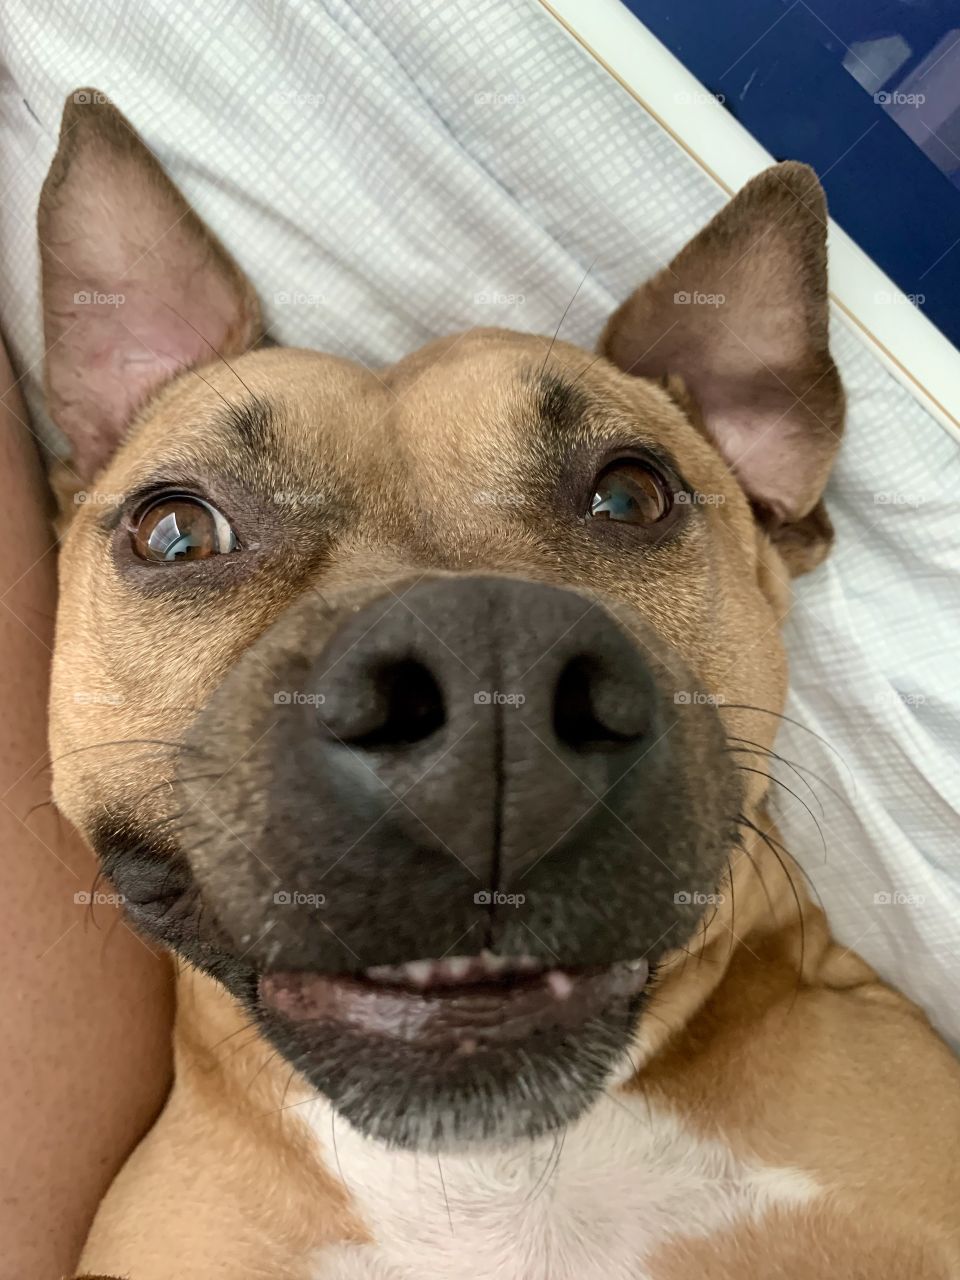 Roxy the American staff mix gives the camera a big smile on Sunday morning in south Florida 